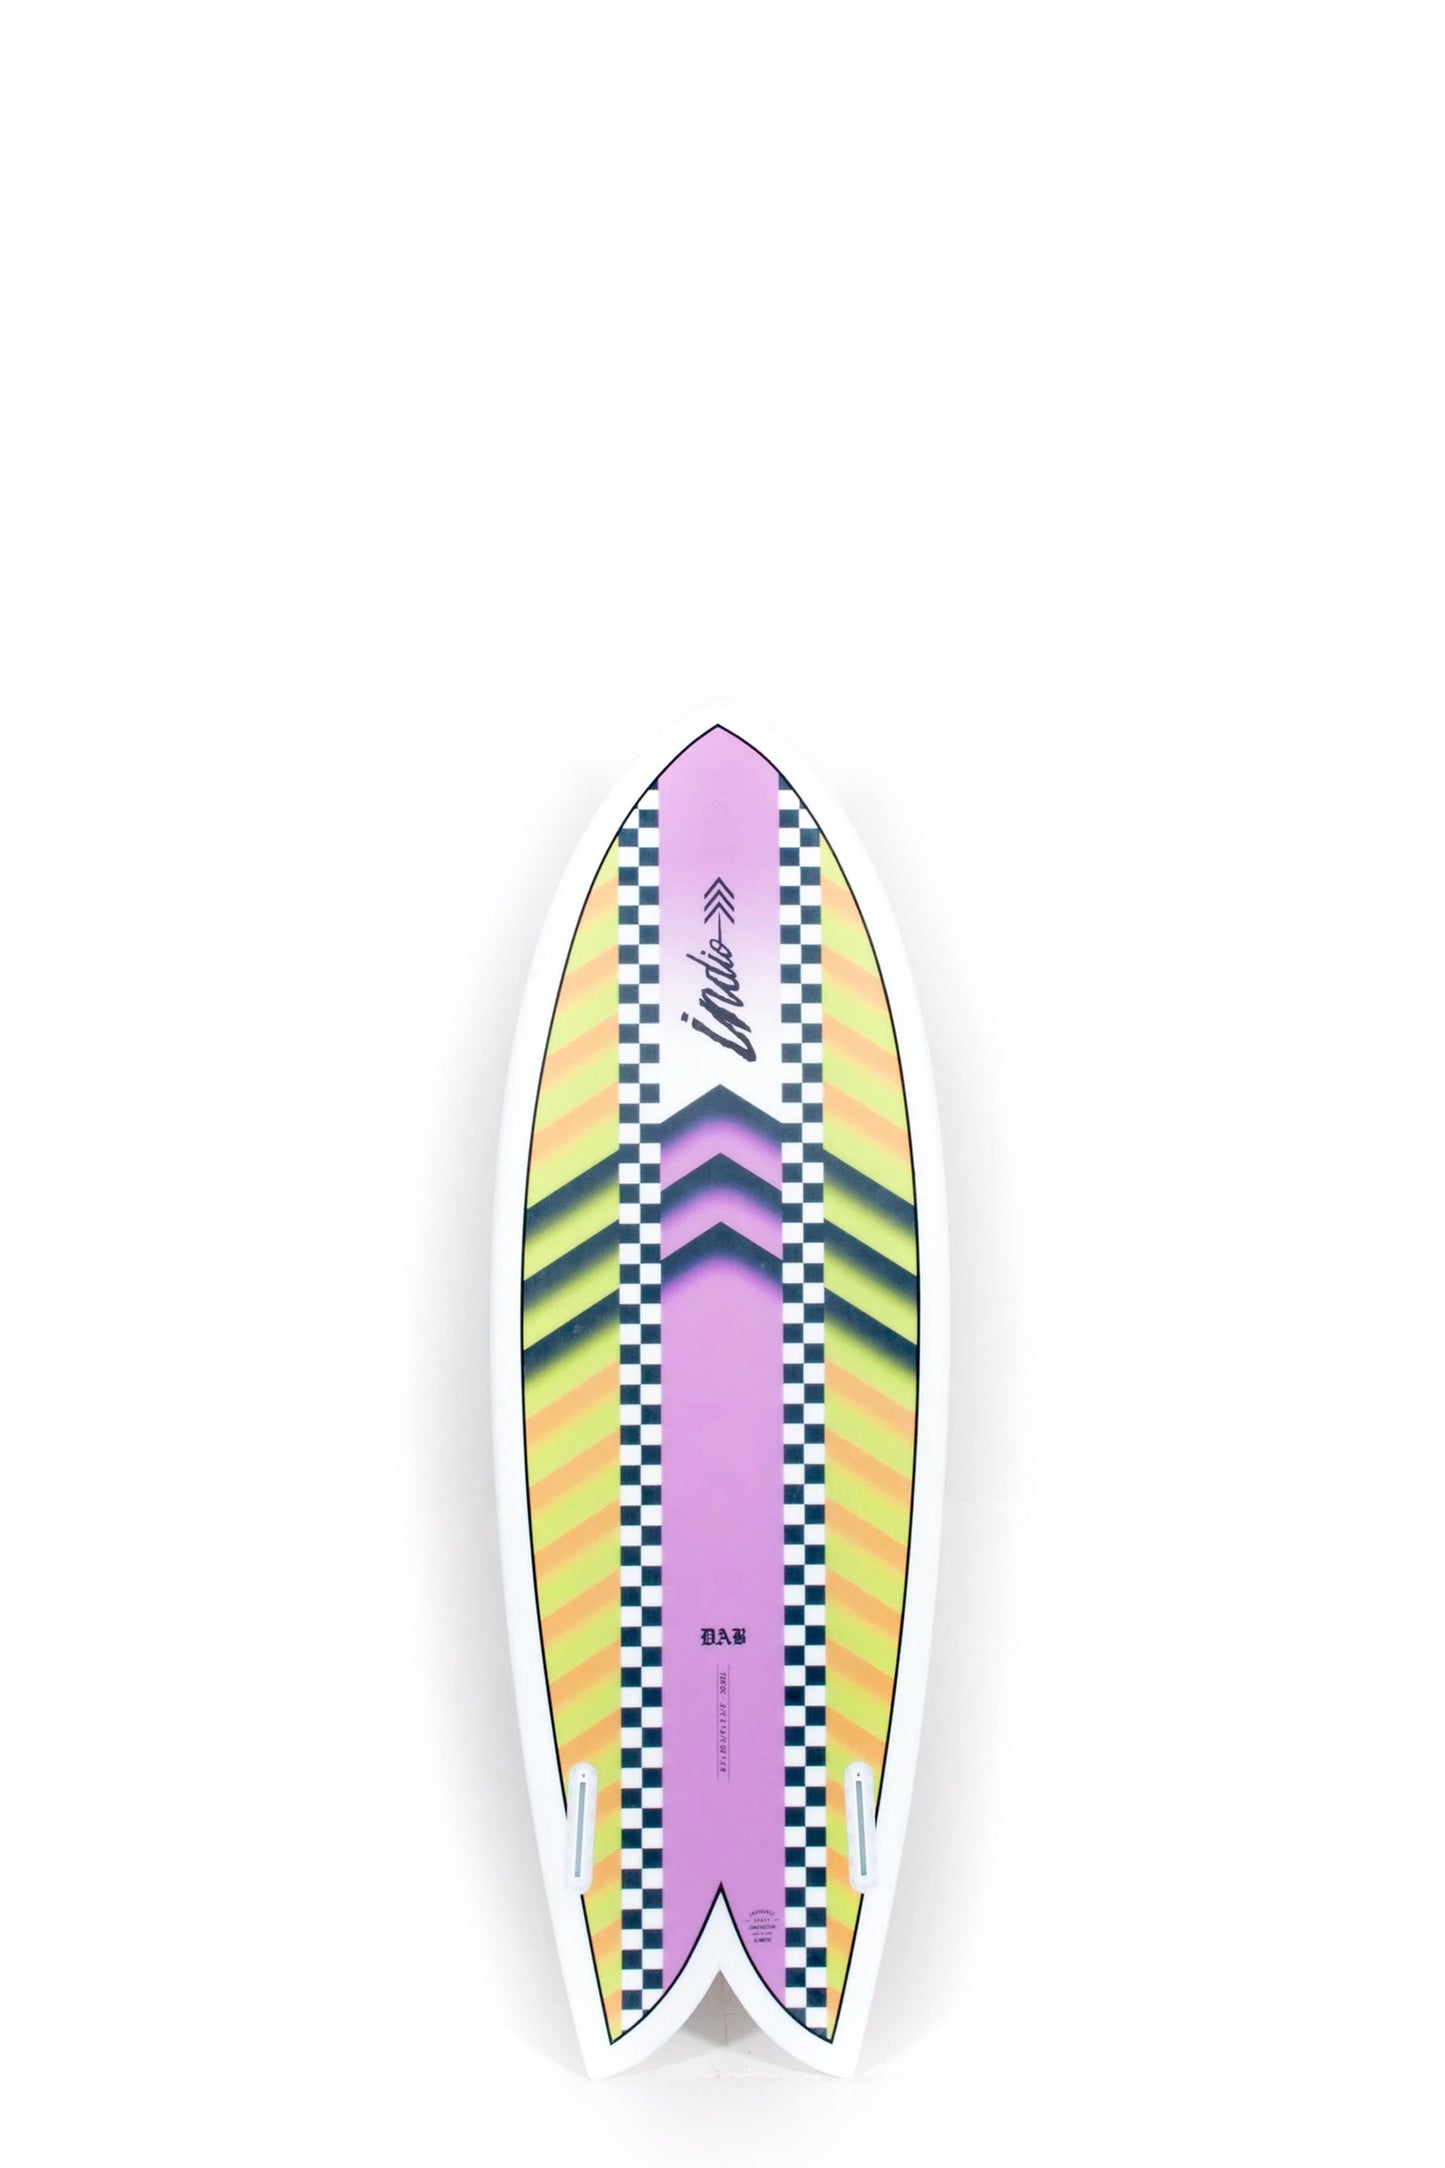 Pukas Surf shop - Indio Surfboard - Endurance - DAB From the 80´s - 5’9” x 21 1/8 x 2 9/16 x 37.6L.